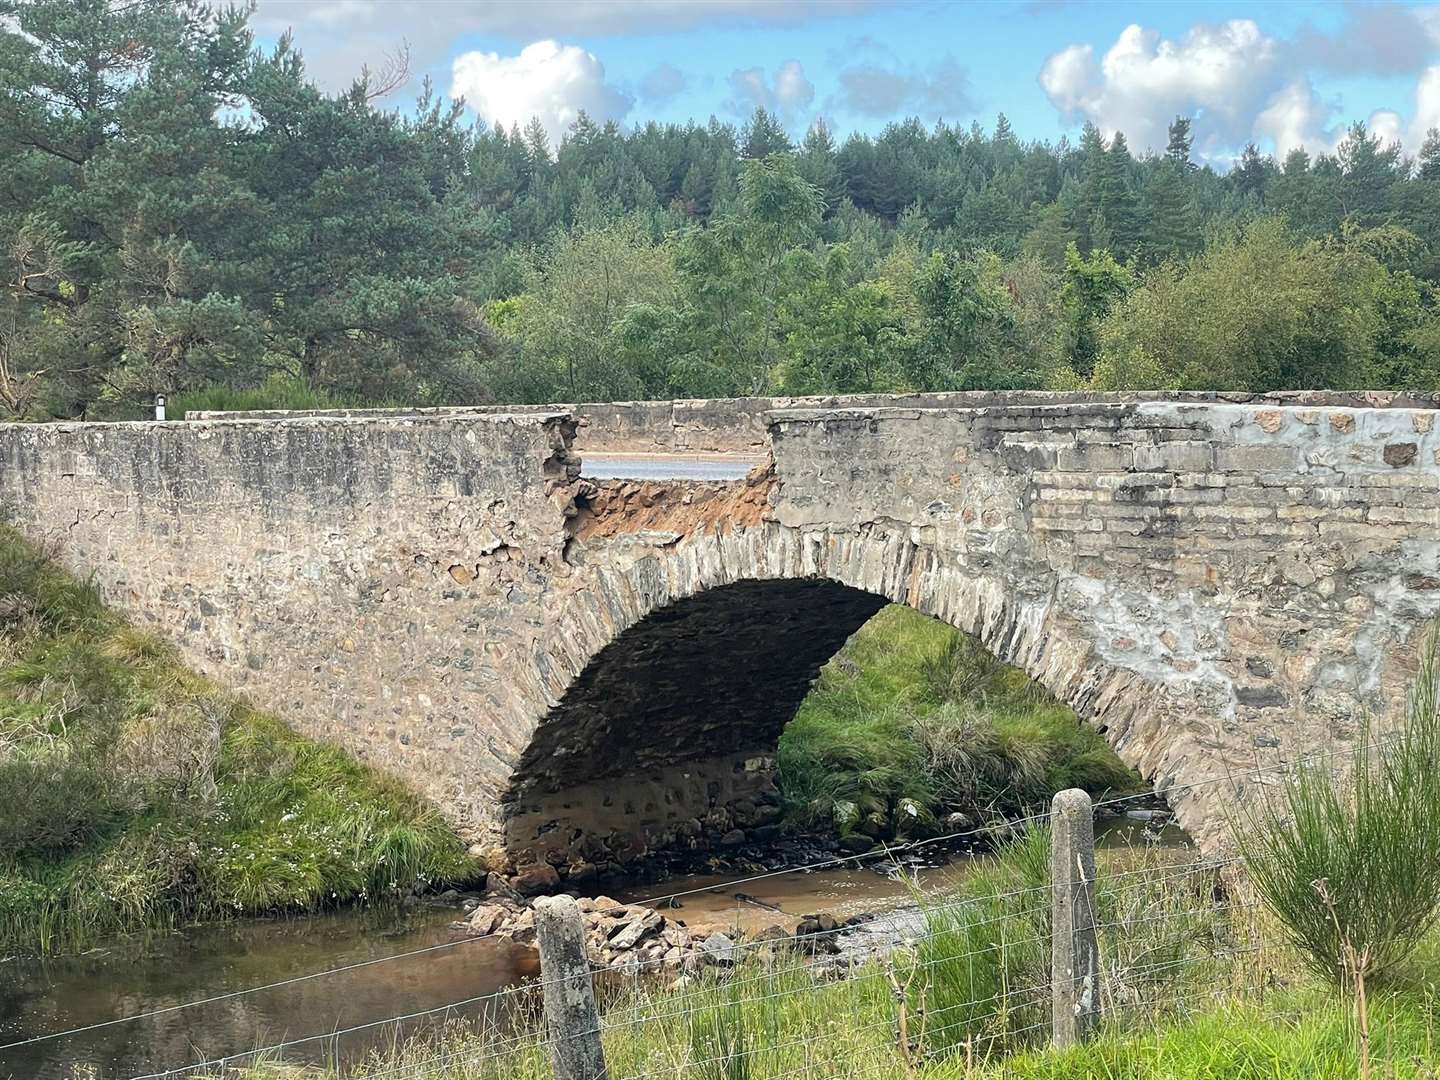 Part of the parapet at Dava Bridge has crumbled and fallen to the river below. Photo: CFS Services Scotland, Grantown